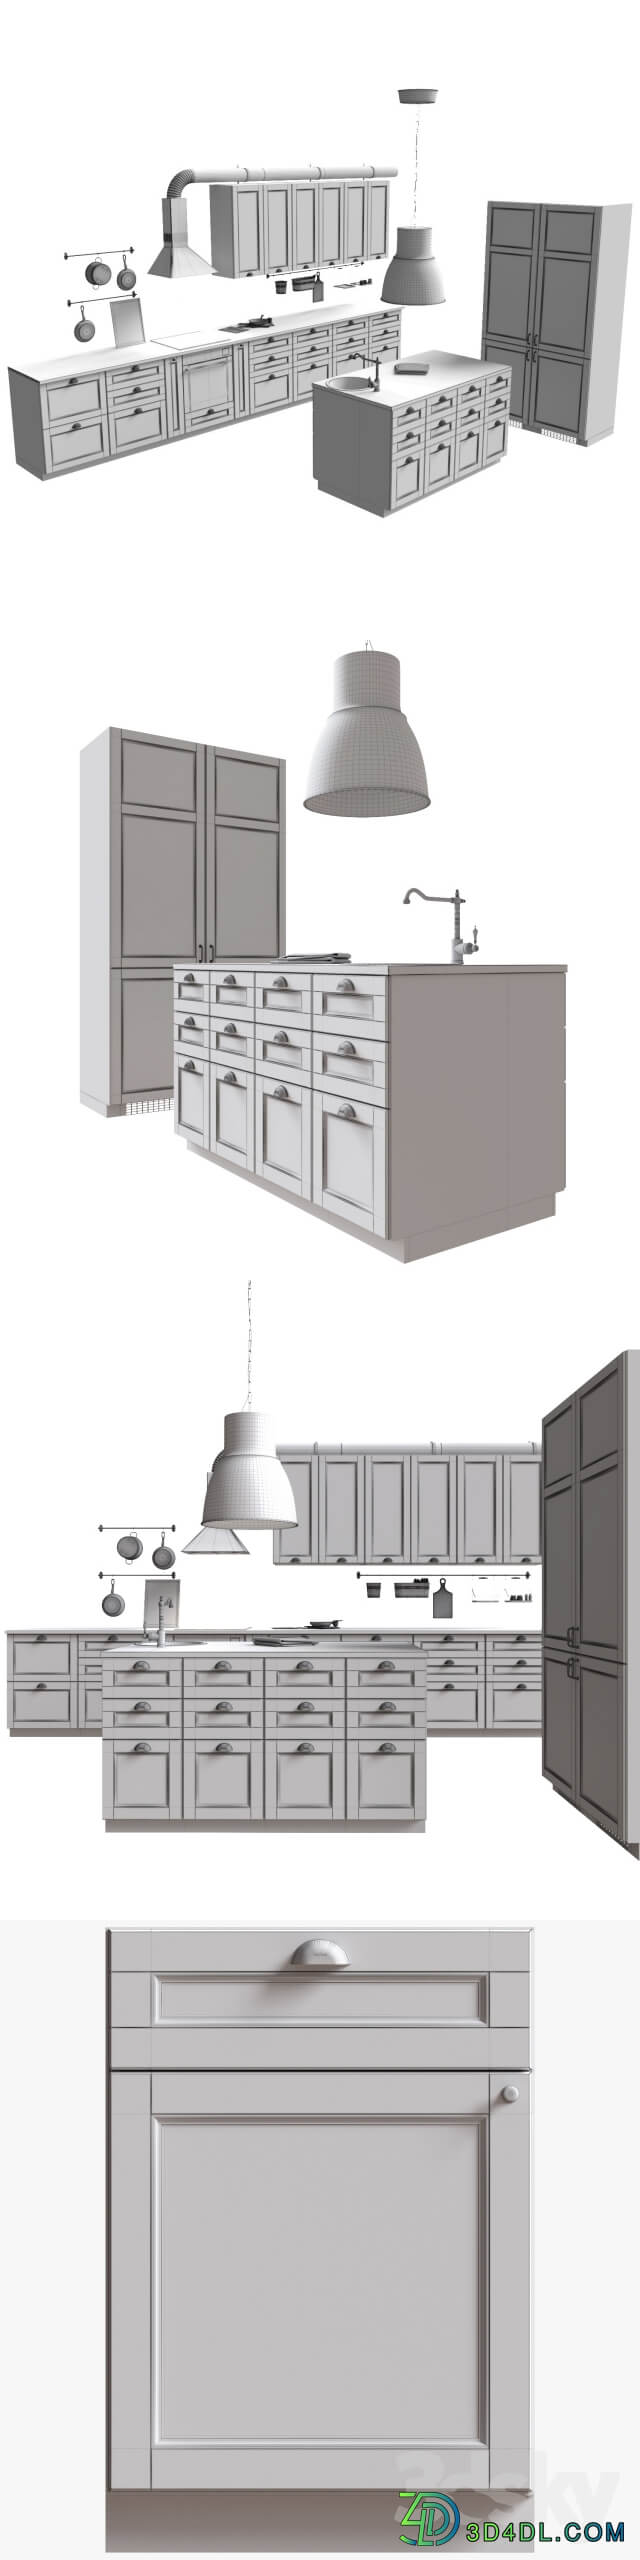 IKEA LAXARBY Kitchen 3D Models